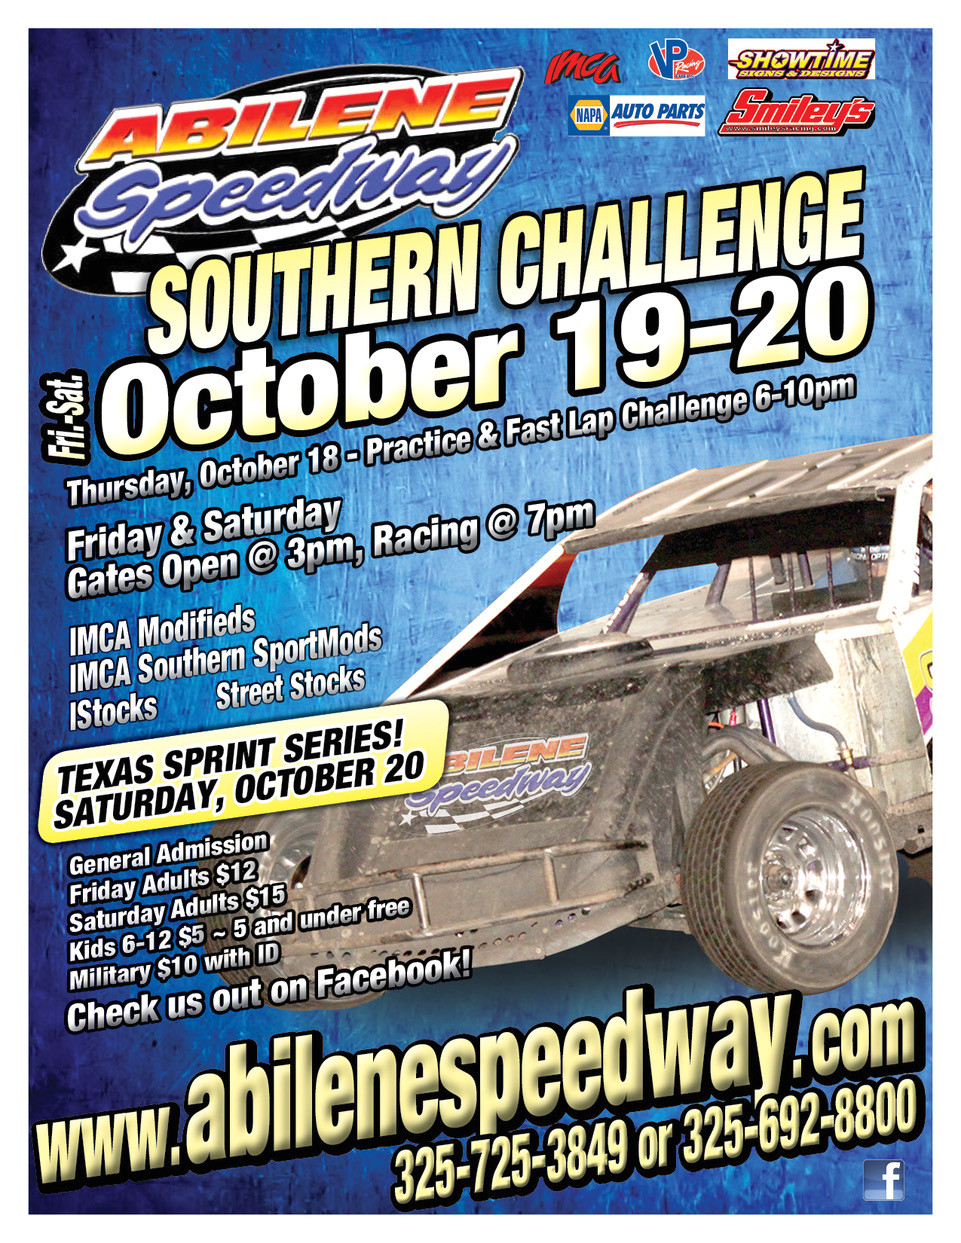 print the registration form below and send in to register for the 2018 southern challenge